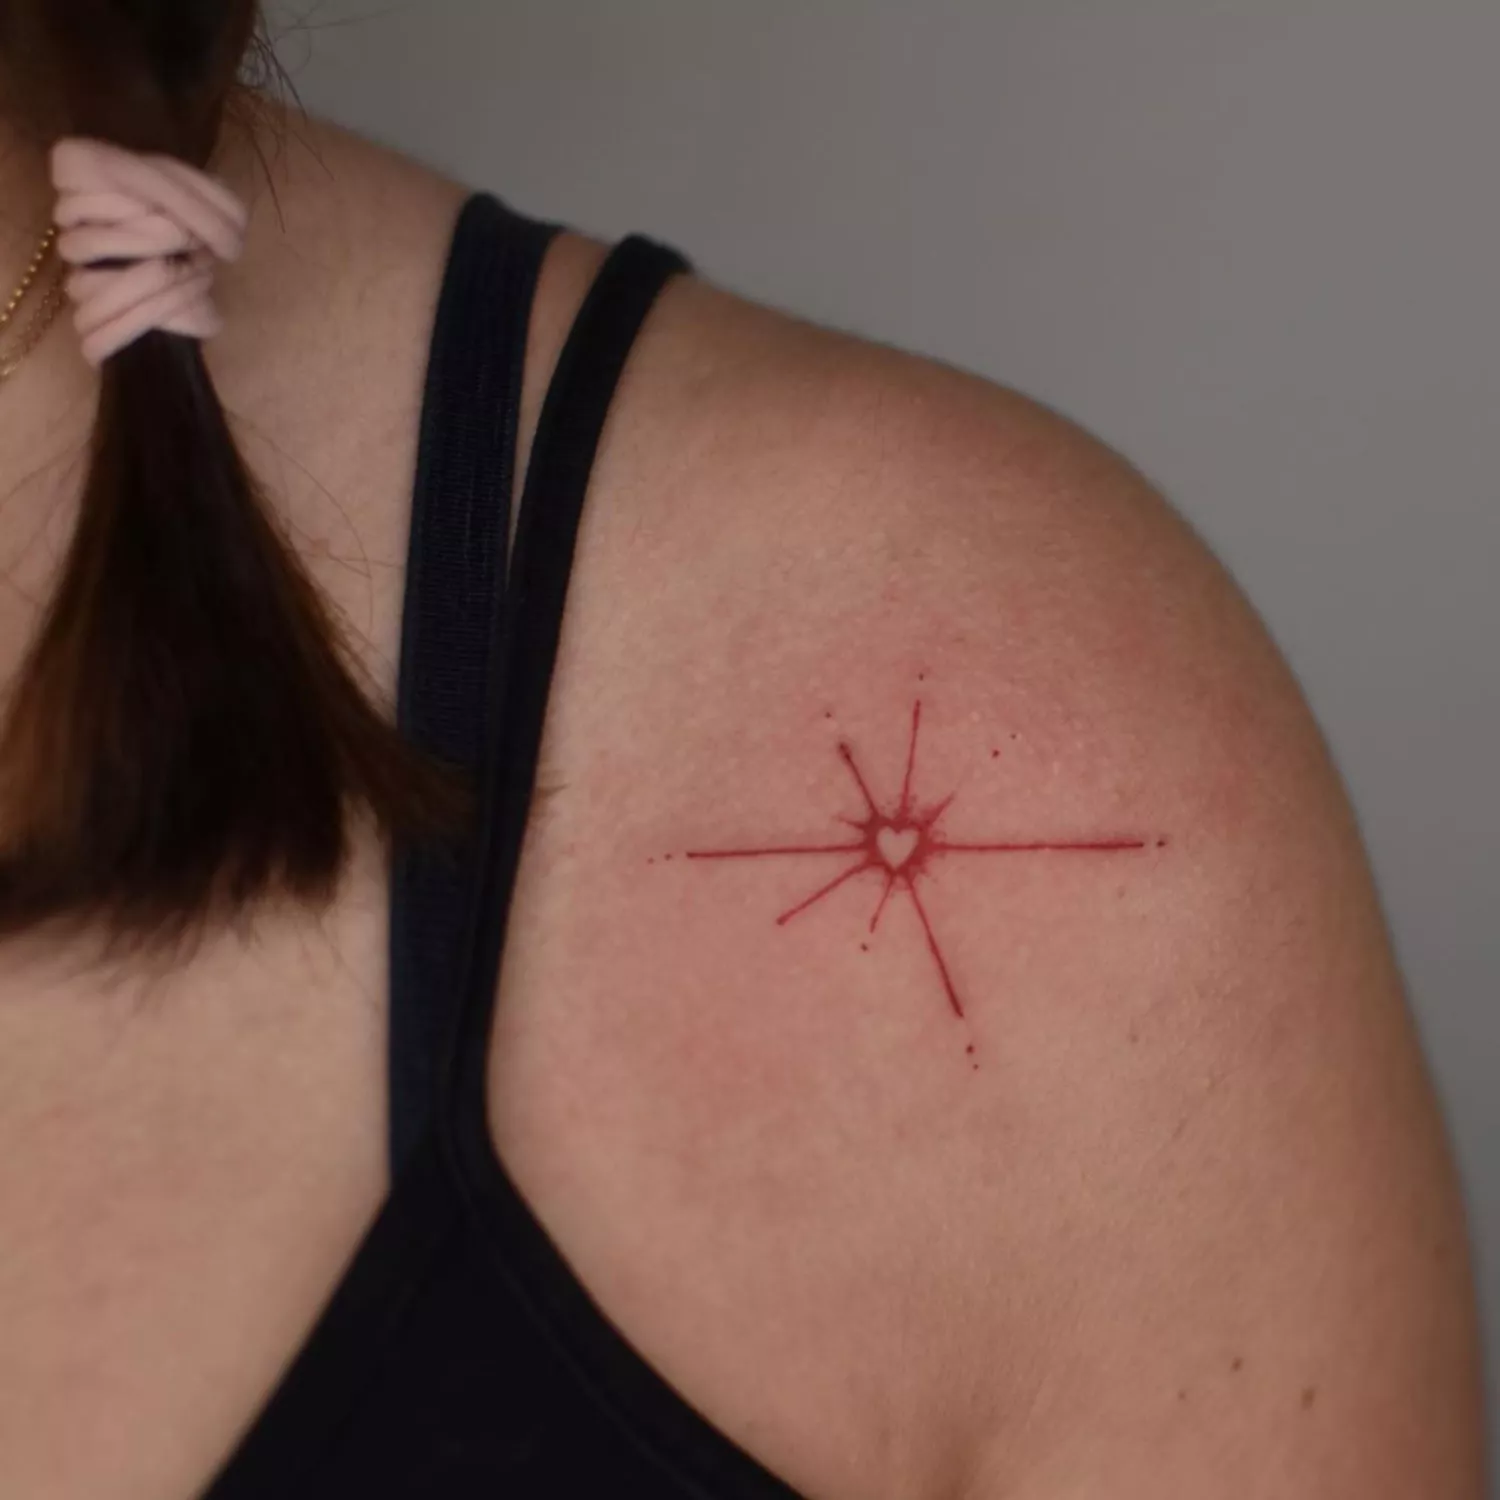 A red tattoo on a shoulder of a shooting star with a heart in the middle.